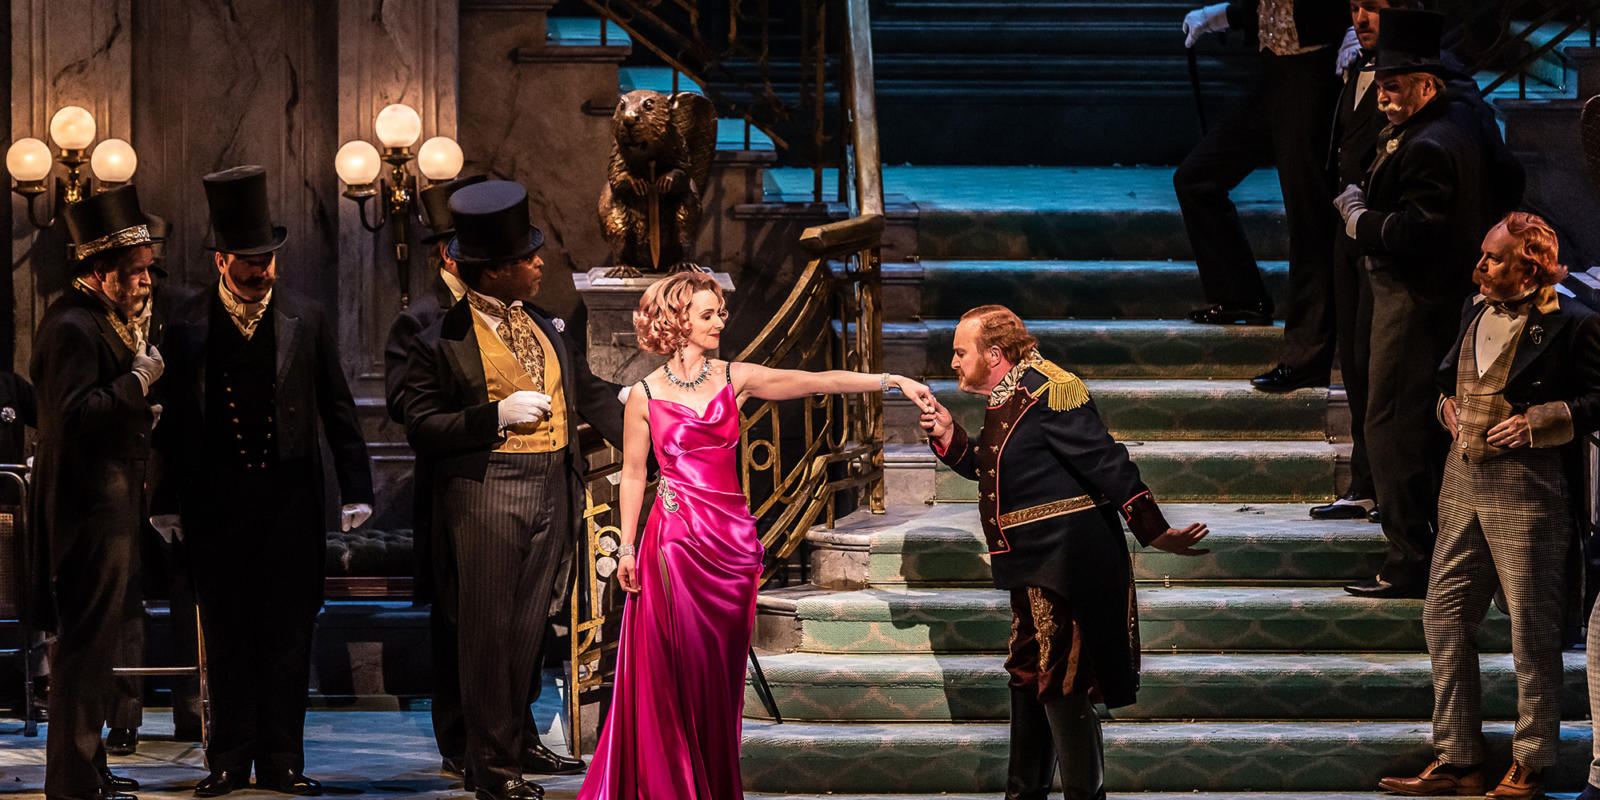 Andre Shore kissing the hand of Sarah Tynan in the Merry Widow